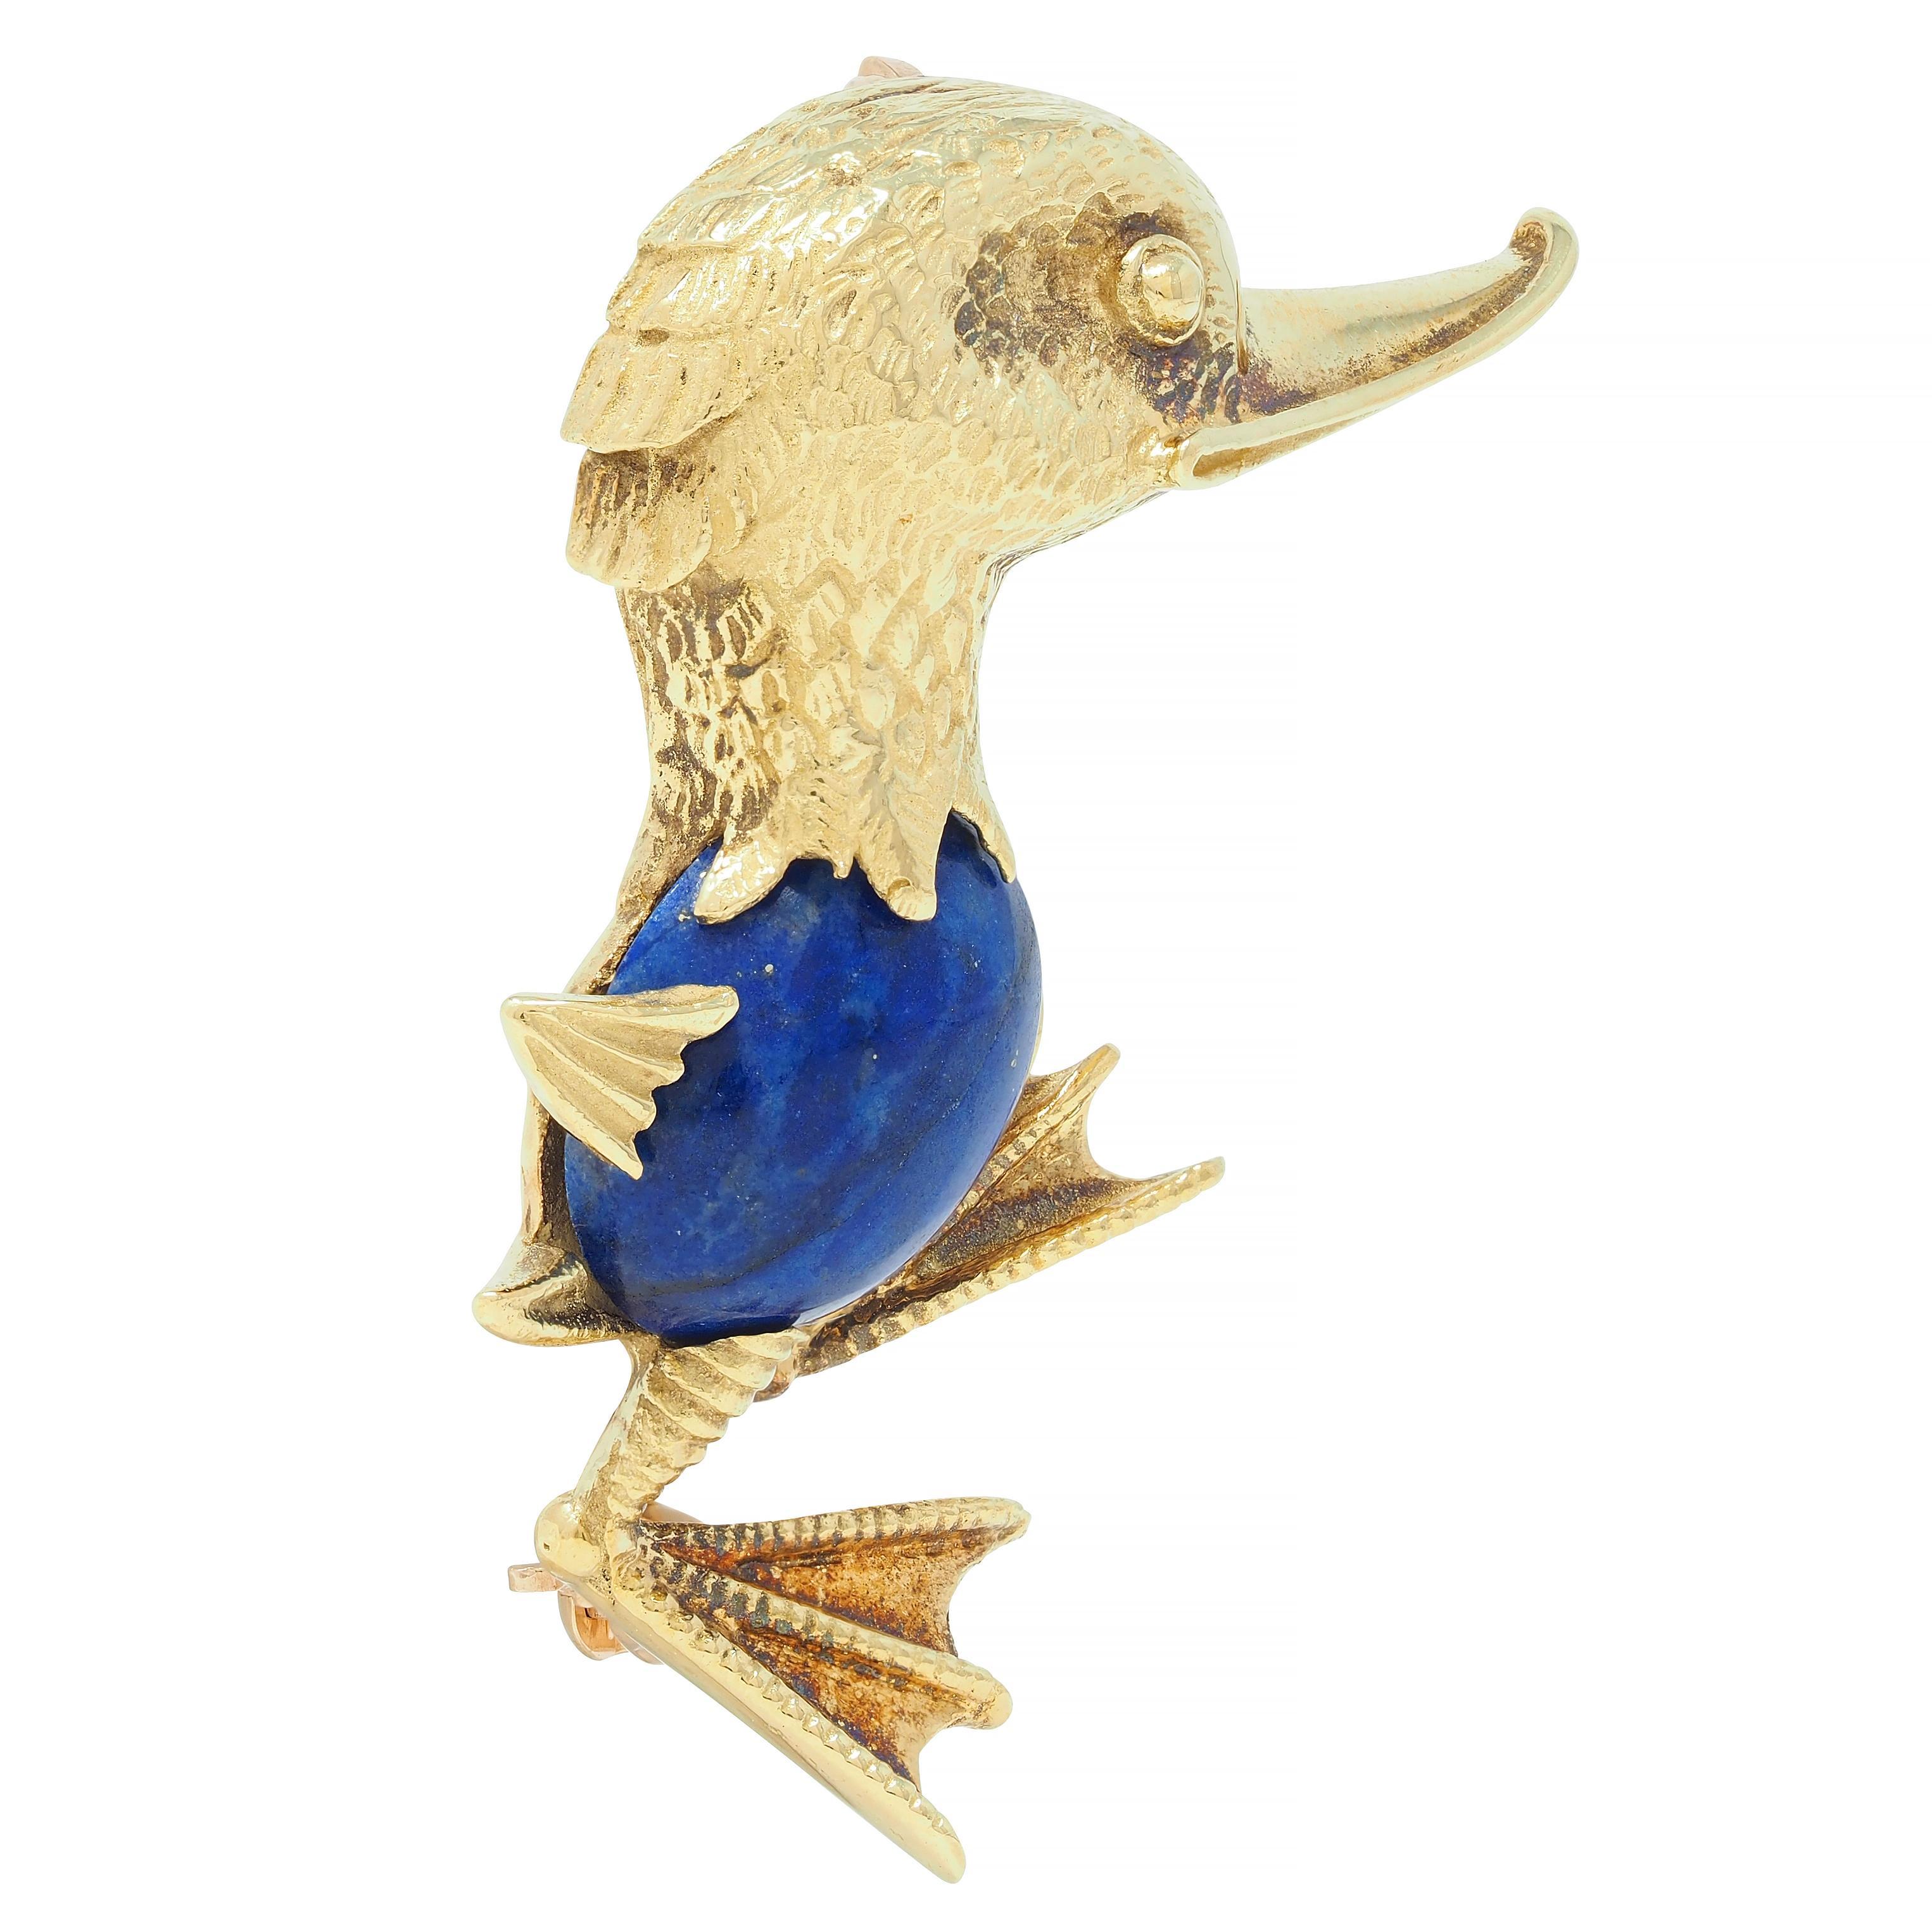 Designed as a stylized, whimsical duck with a dimensional head and feet 
Grooved with smiling features and engraved with feather texture 
Centering an oval-shaped lapis lazuli cabochon - measuring 10.0 x 12.0 mm 
Opaque ultramarine blue in color